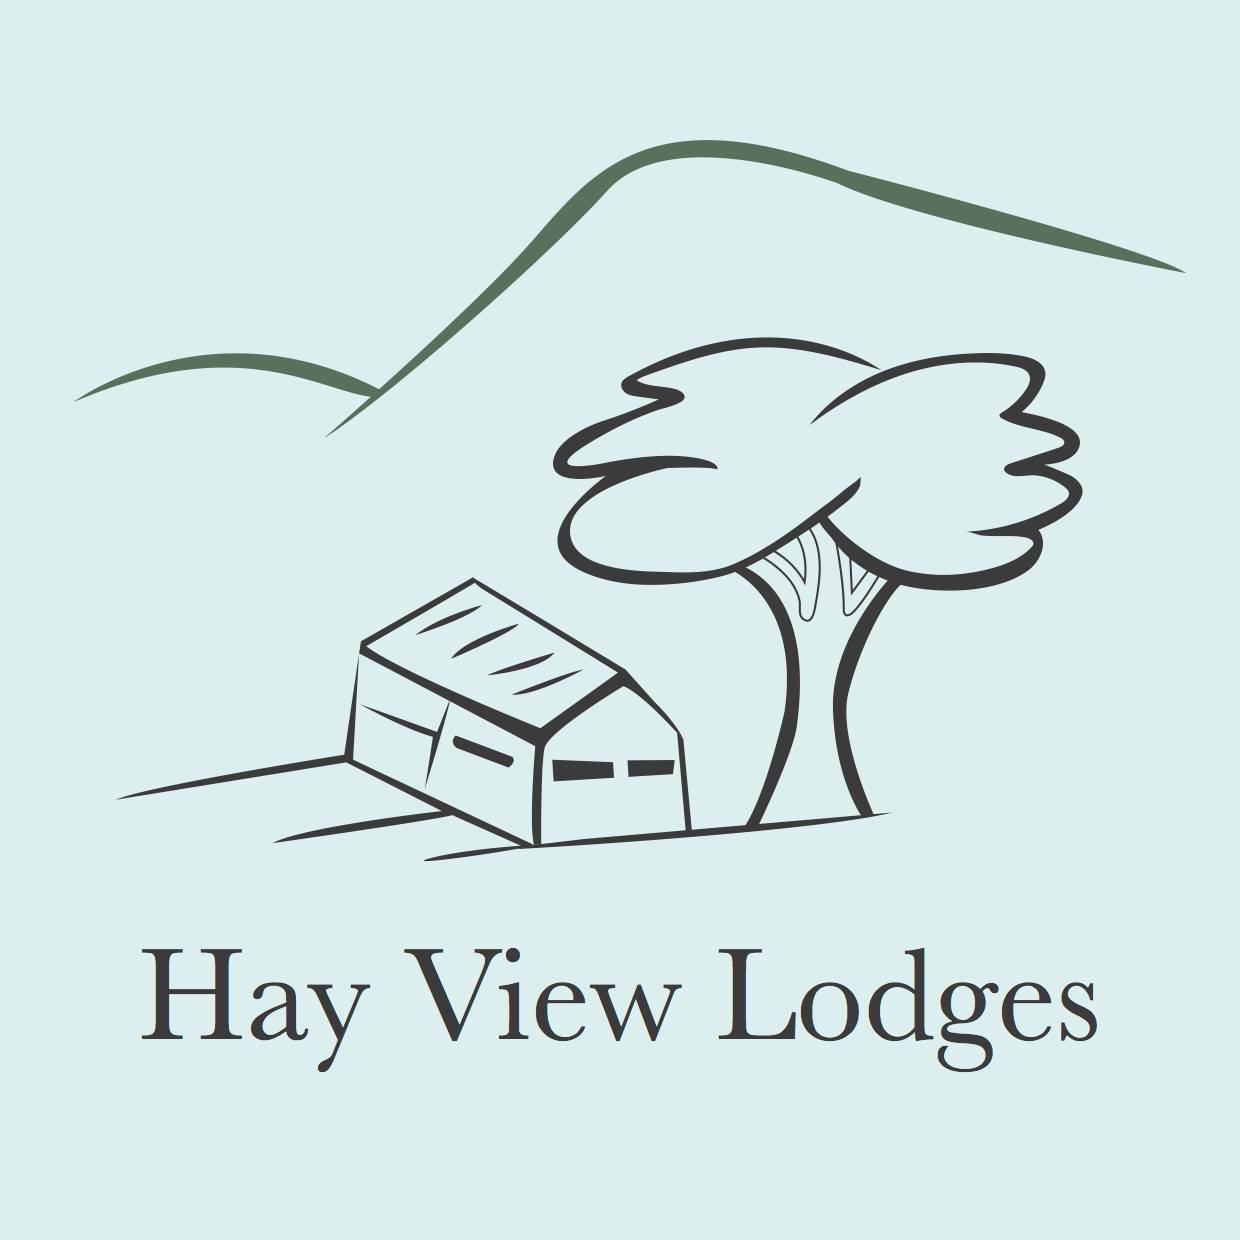 HAY VIEW LODGES